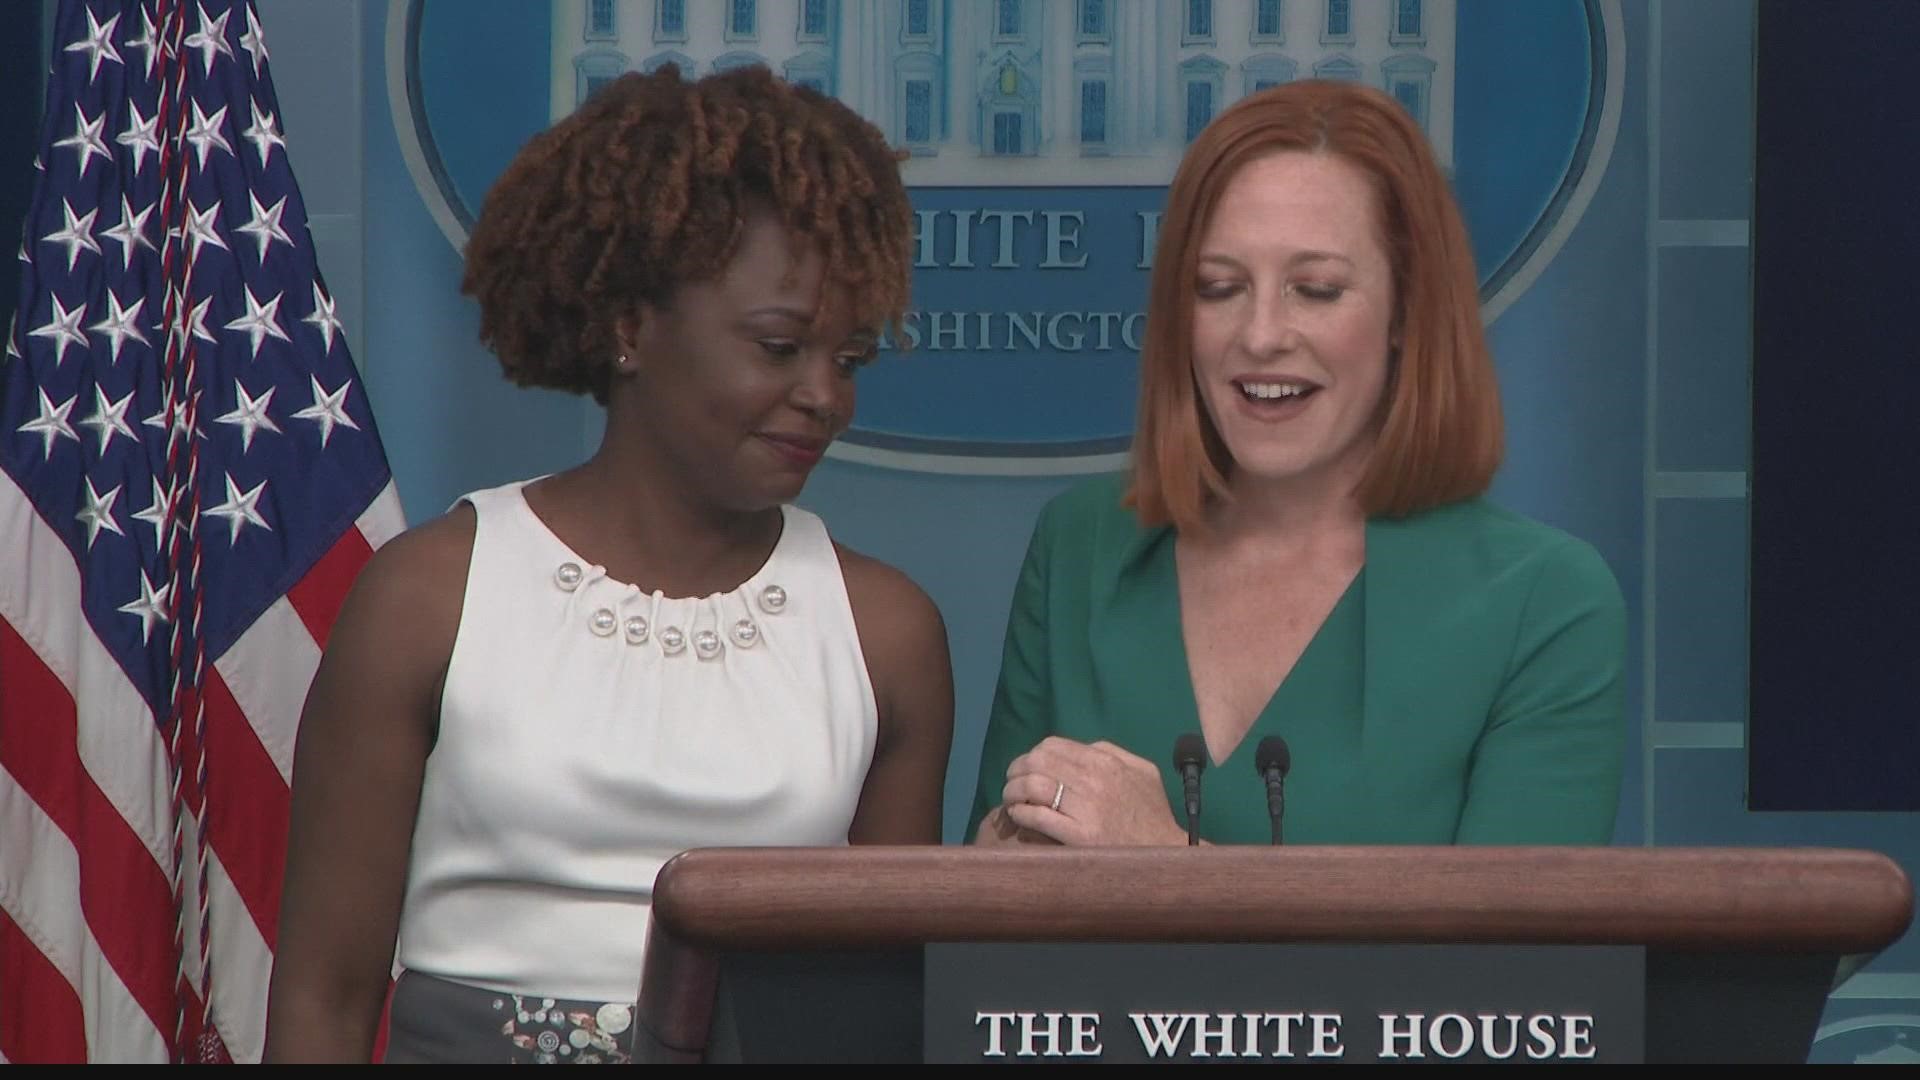 The announcement comes amid previous reports that Jen Psaki will be joining MSNBC.